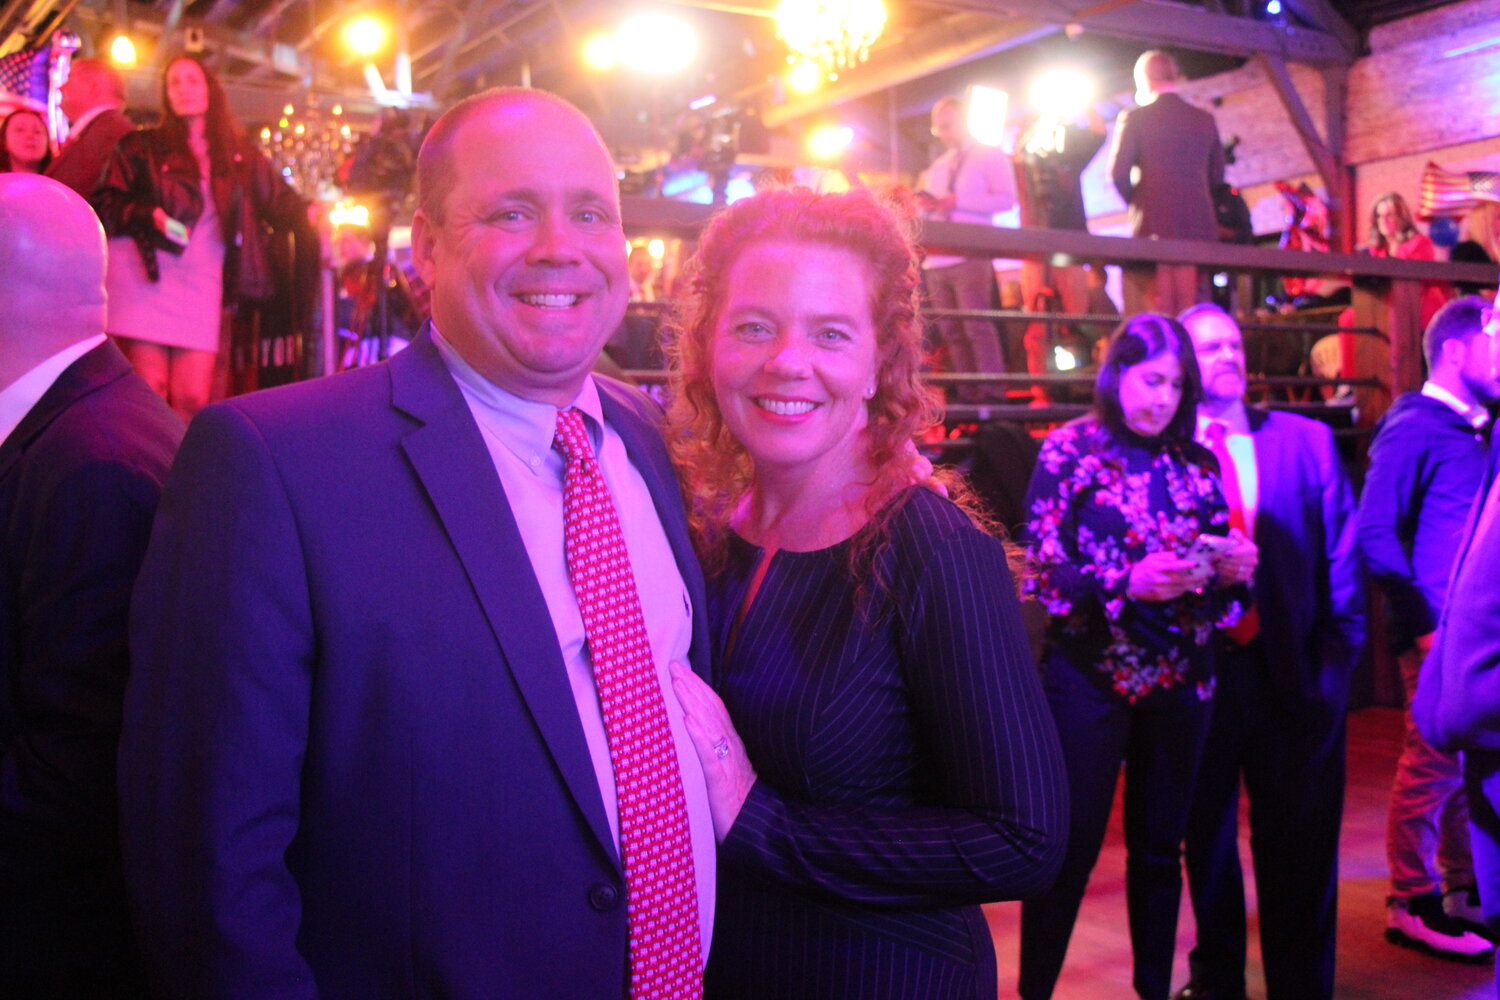 A business owner, Mike McElwee ran on a campaign promising to address issues of inflation, crime, and quality of life. He is pictured with wife of 25 years, Mary Ellen.